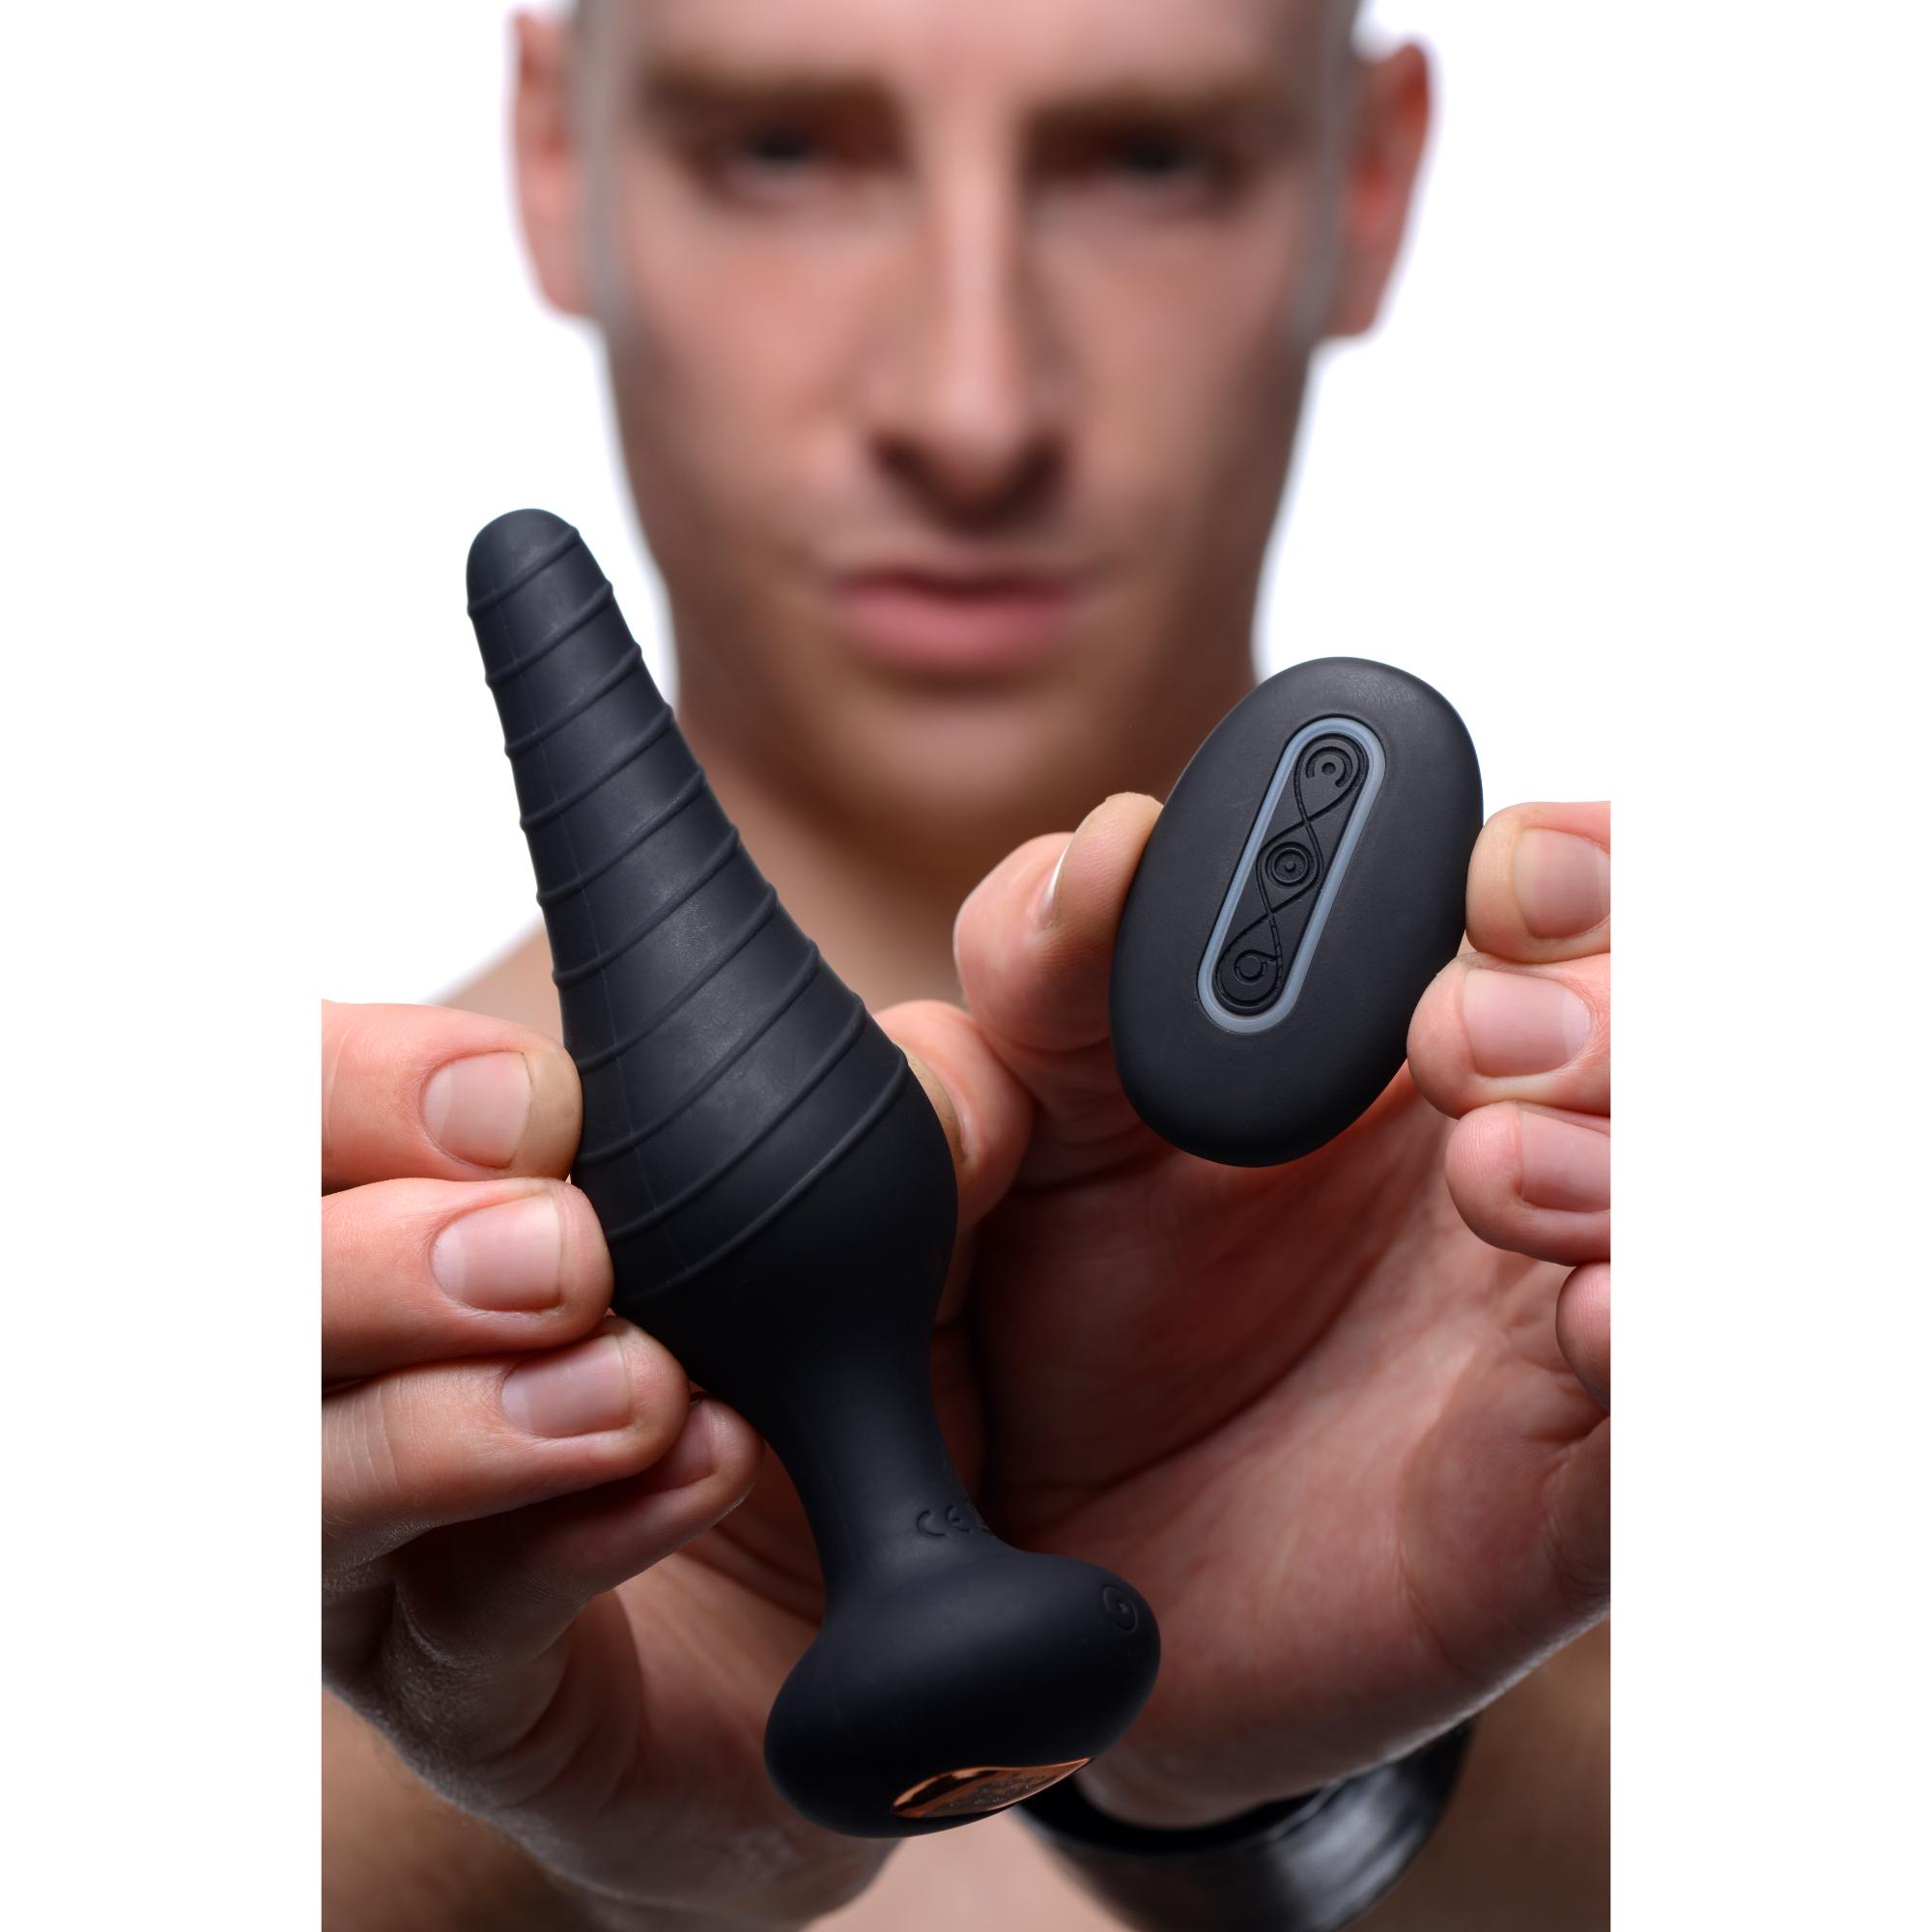 Under Control Silicone Vibrating Anal Plug with Remote Control